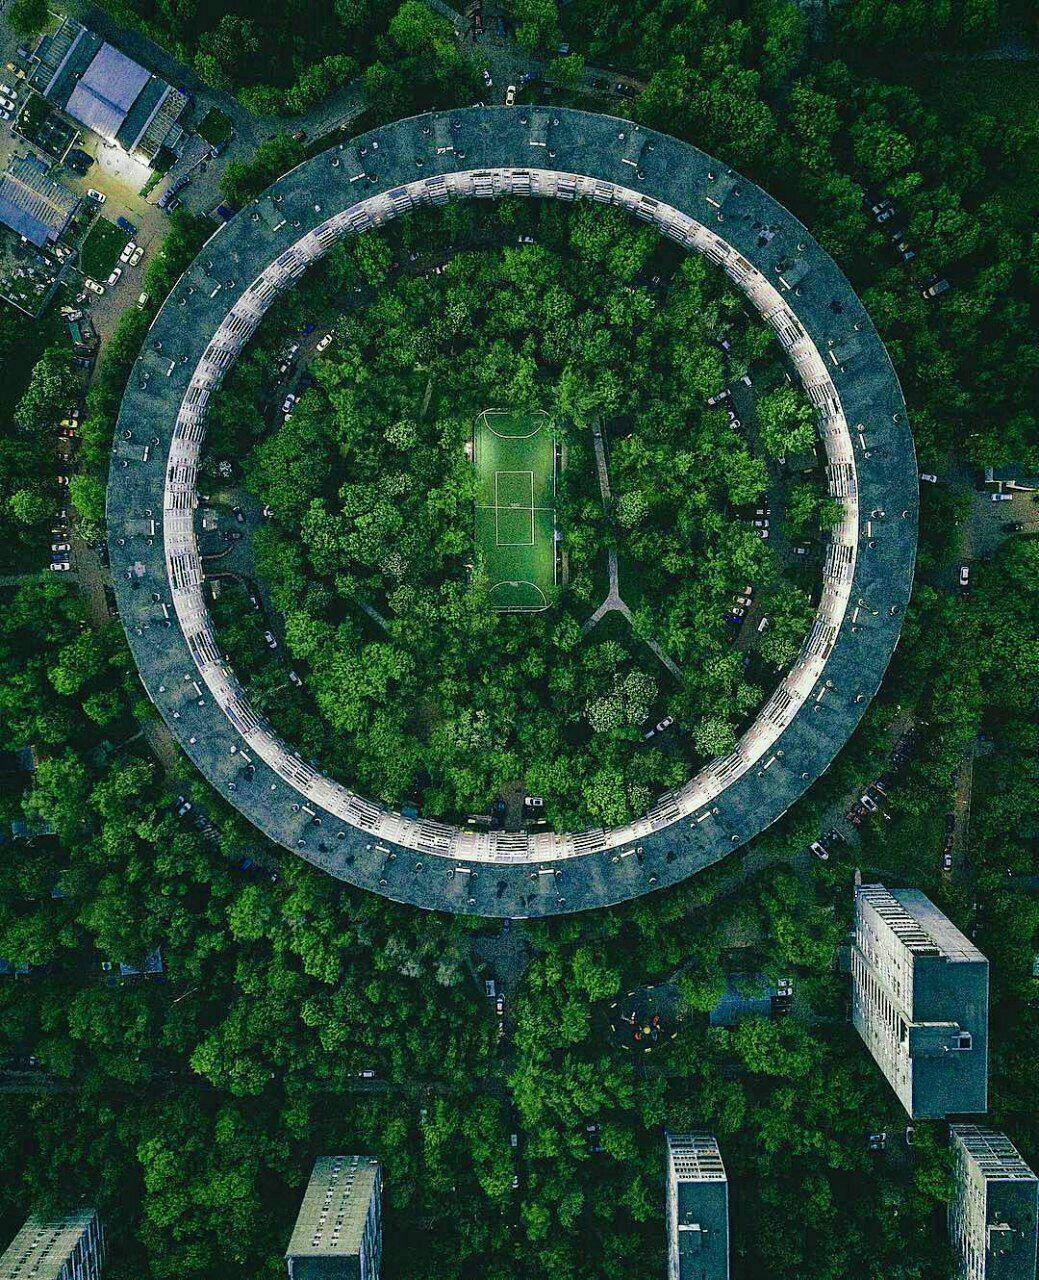 Aerial photograph of a tennis court in the middle of a circular building surrounded by trees